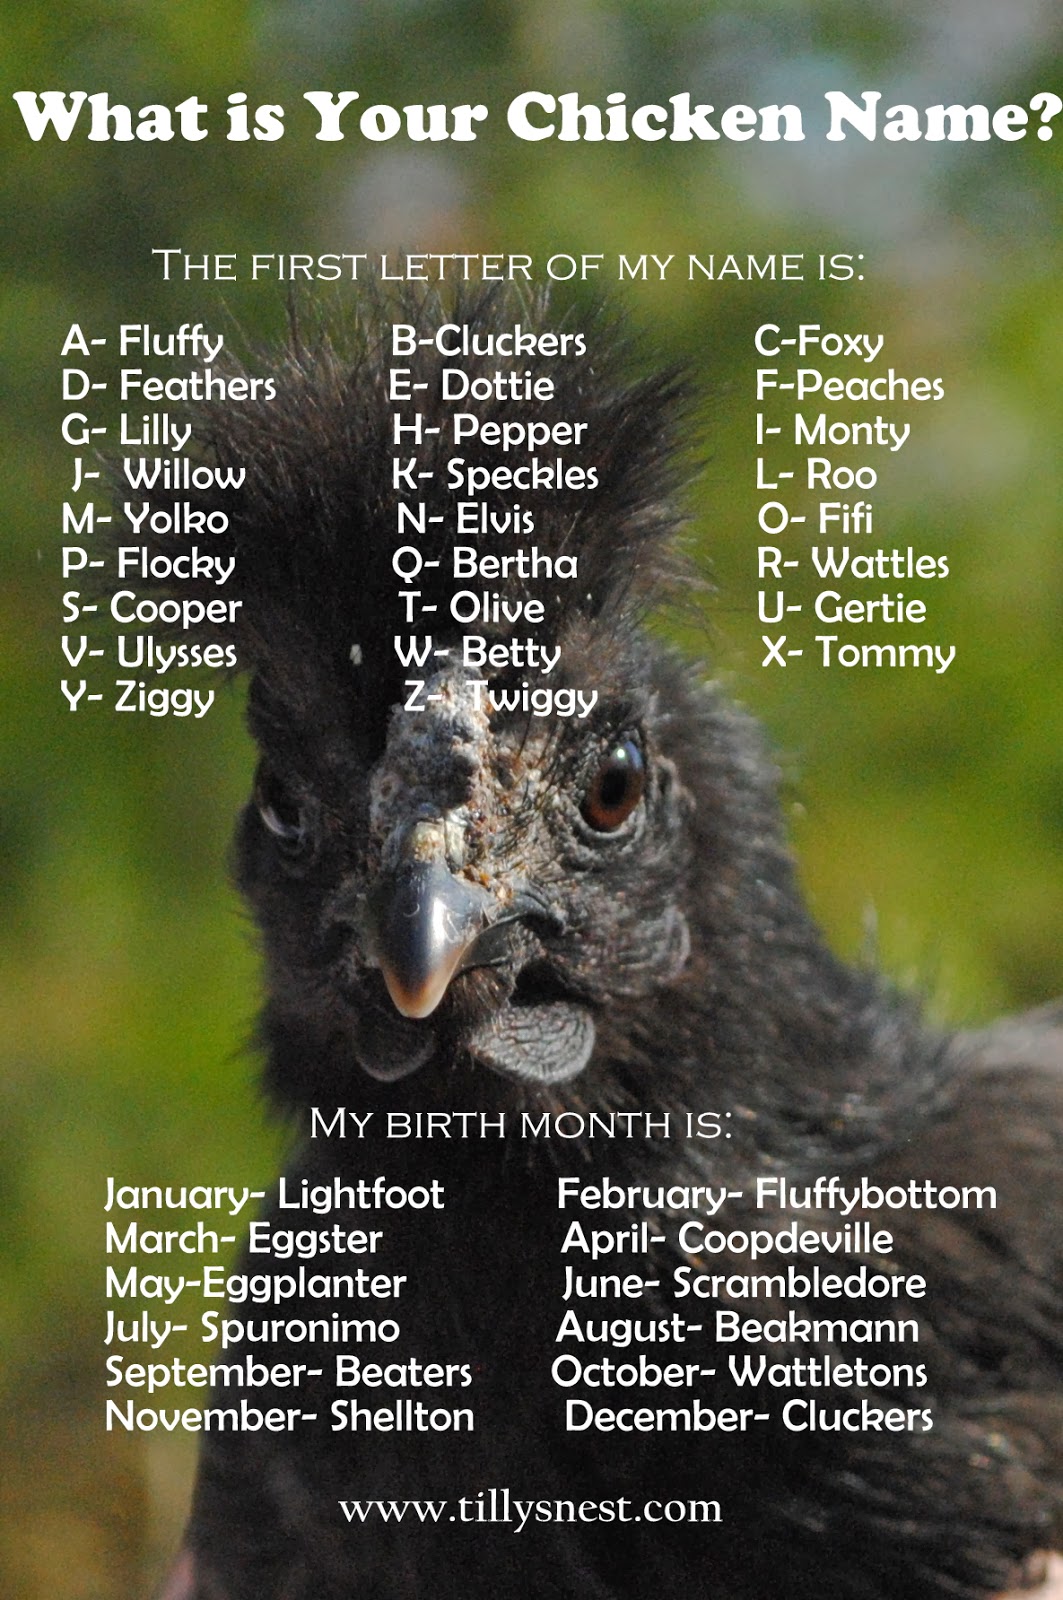 Tilly's Nest: What is Your Chicken Name?